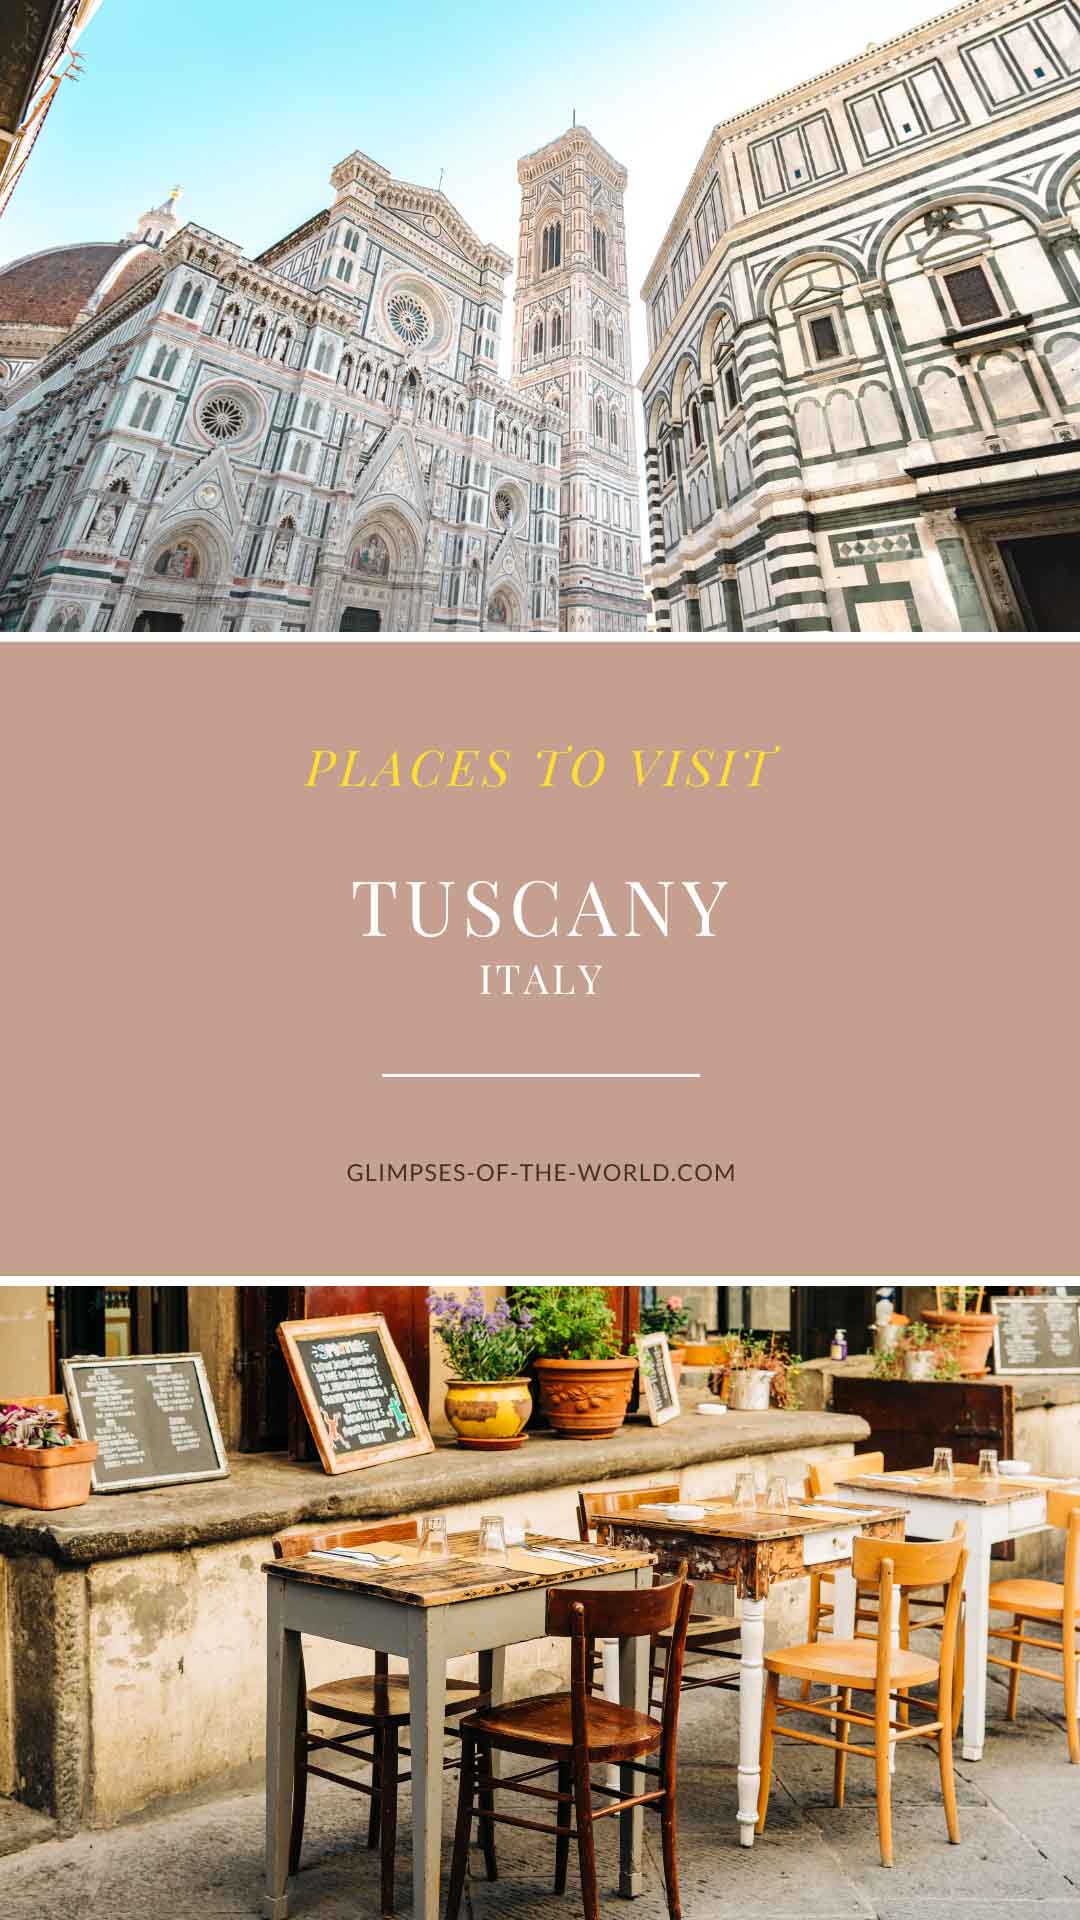 Places to visit in Tuscany